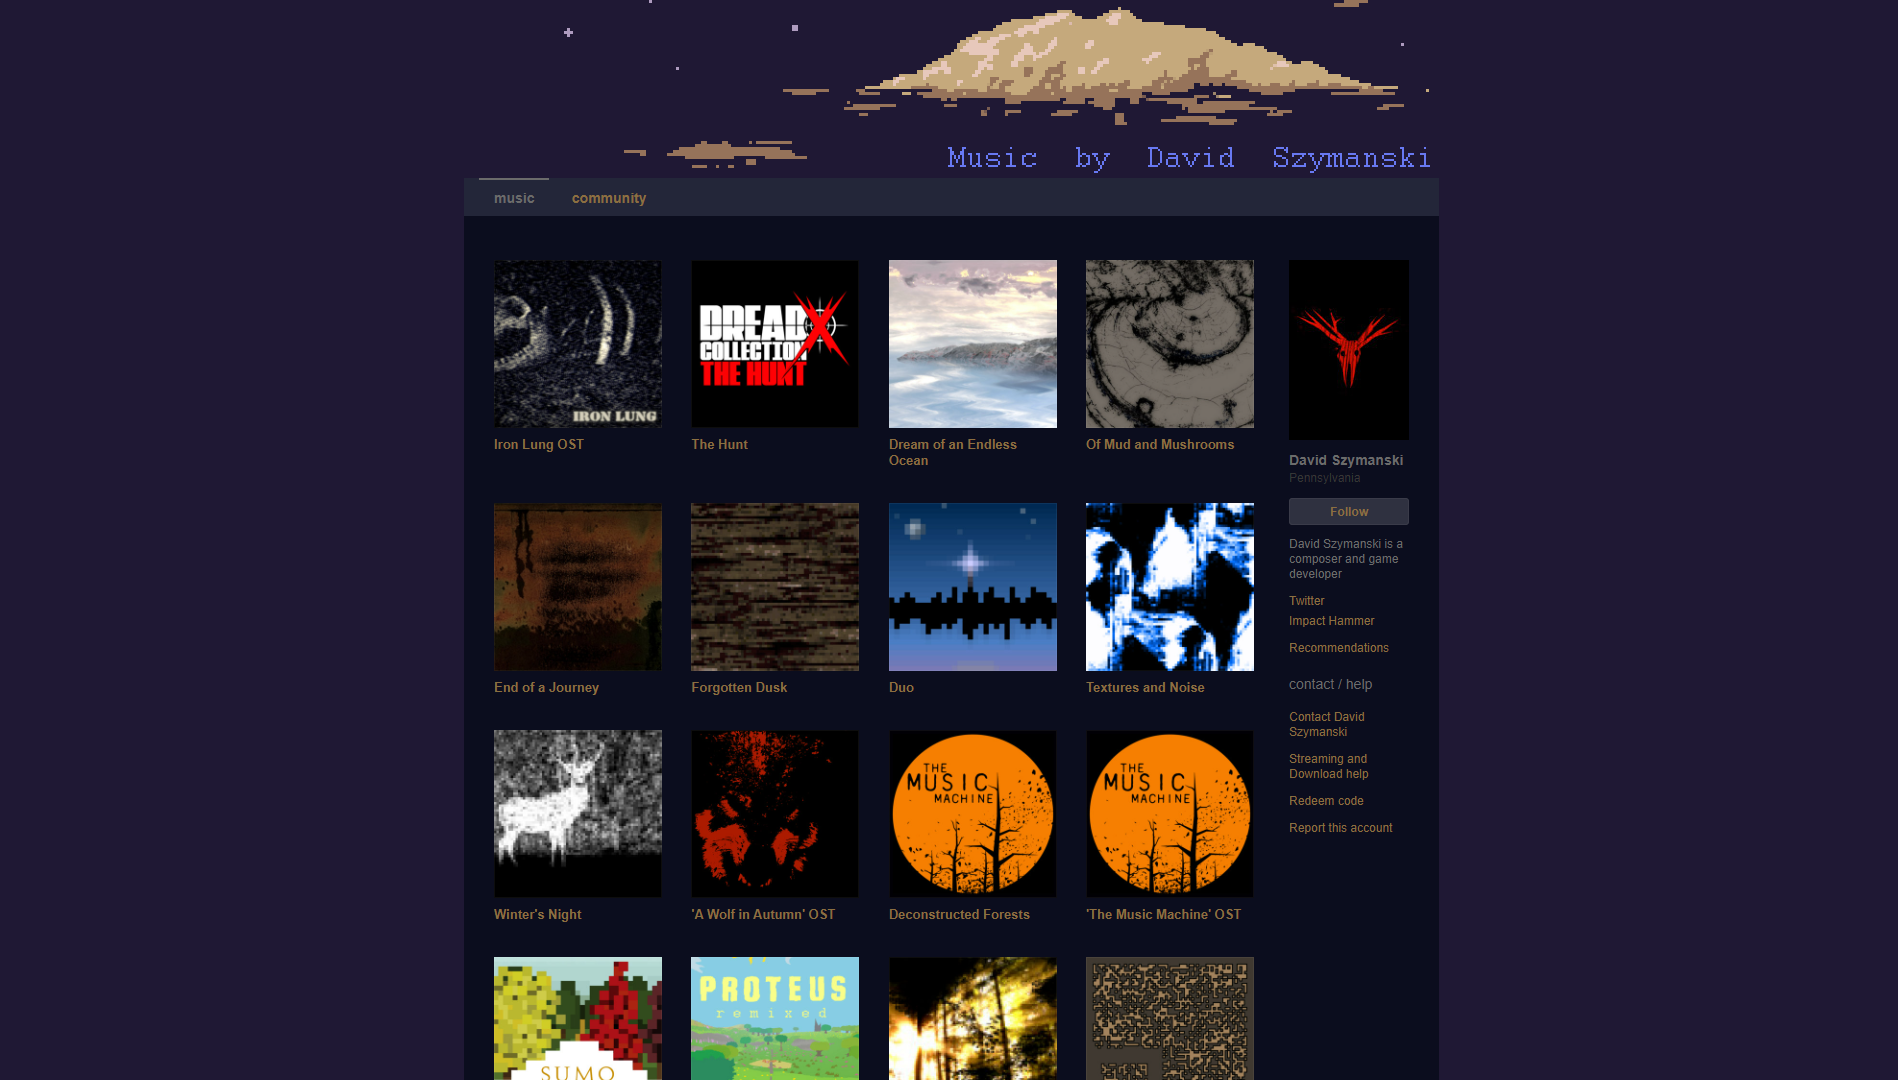 A cursory glance at Dave's Bandcamp page will show that he has been kicking out jams for years